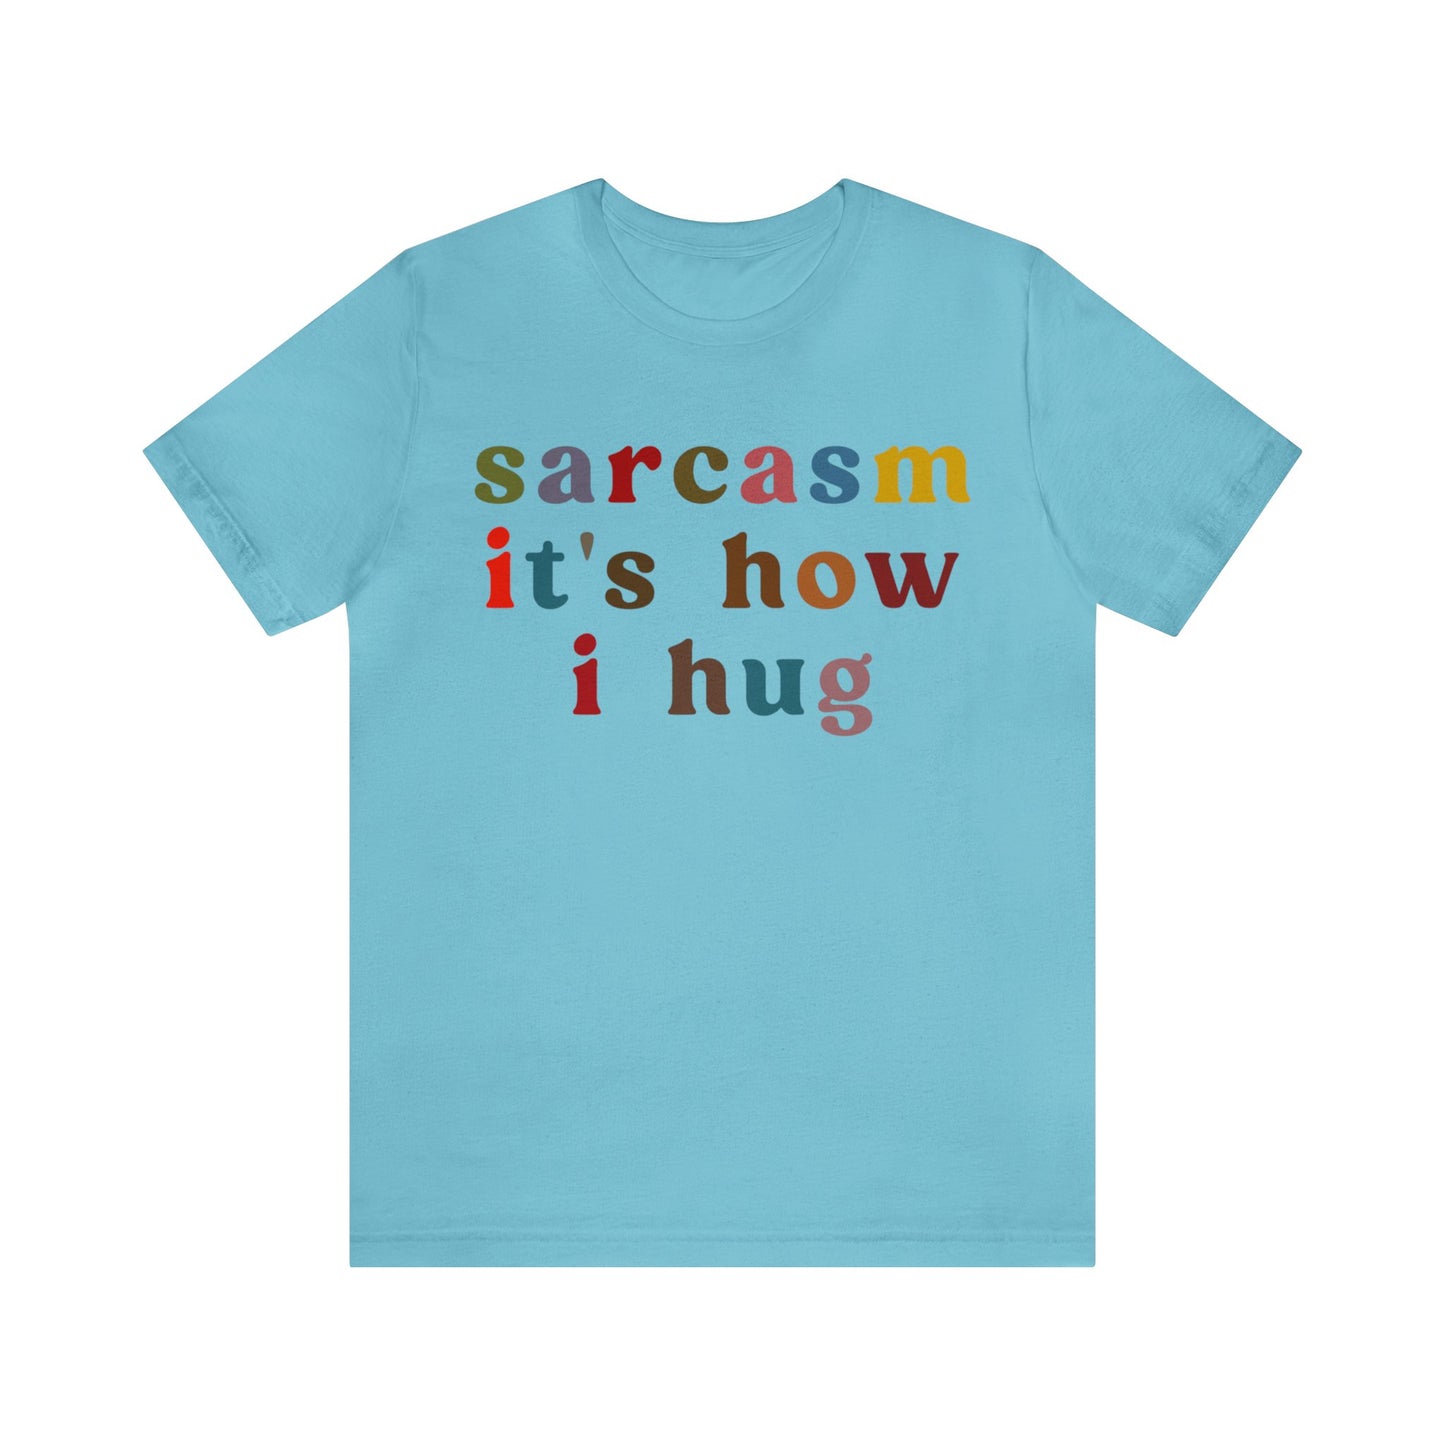 Sarcasm It's How I Hug Shirt, Sarcastic Quote Shirt, Sarcasm Women Shirt, Funny Mom Shirt, Shirt for Women, Gift for Her, Mom Shirt, T1260